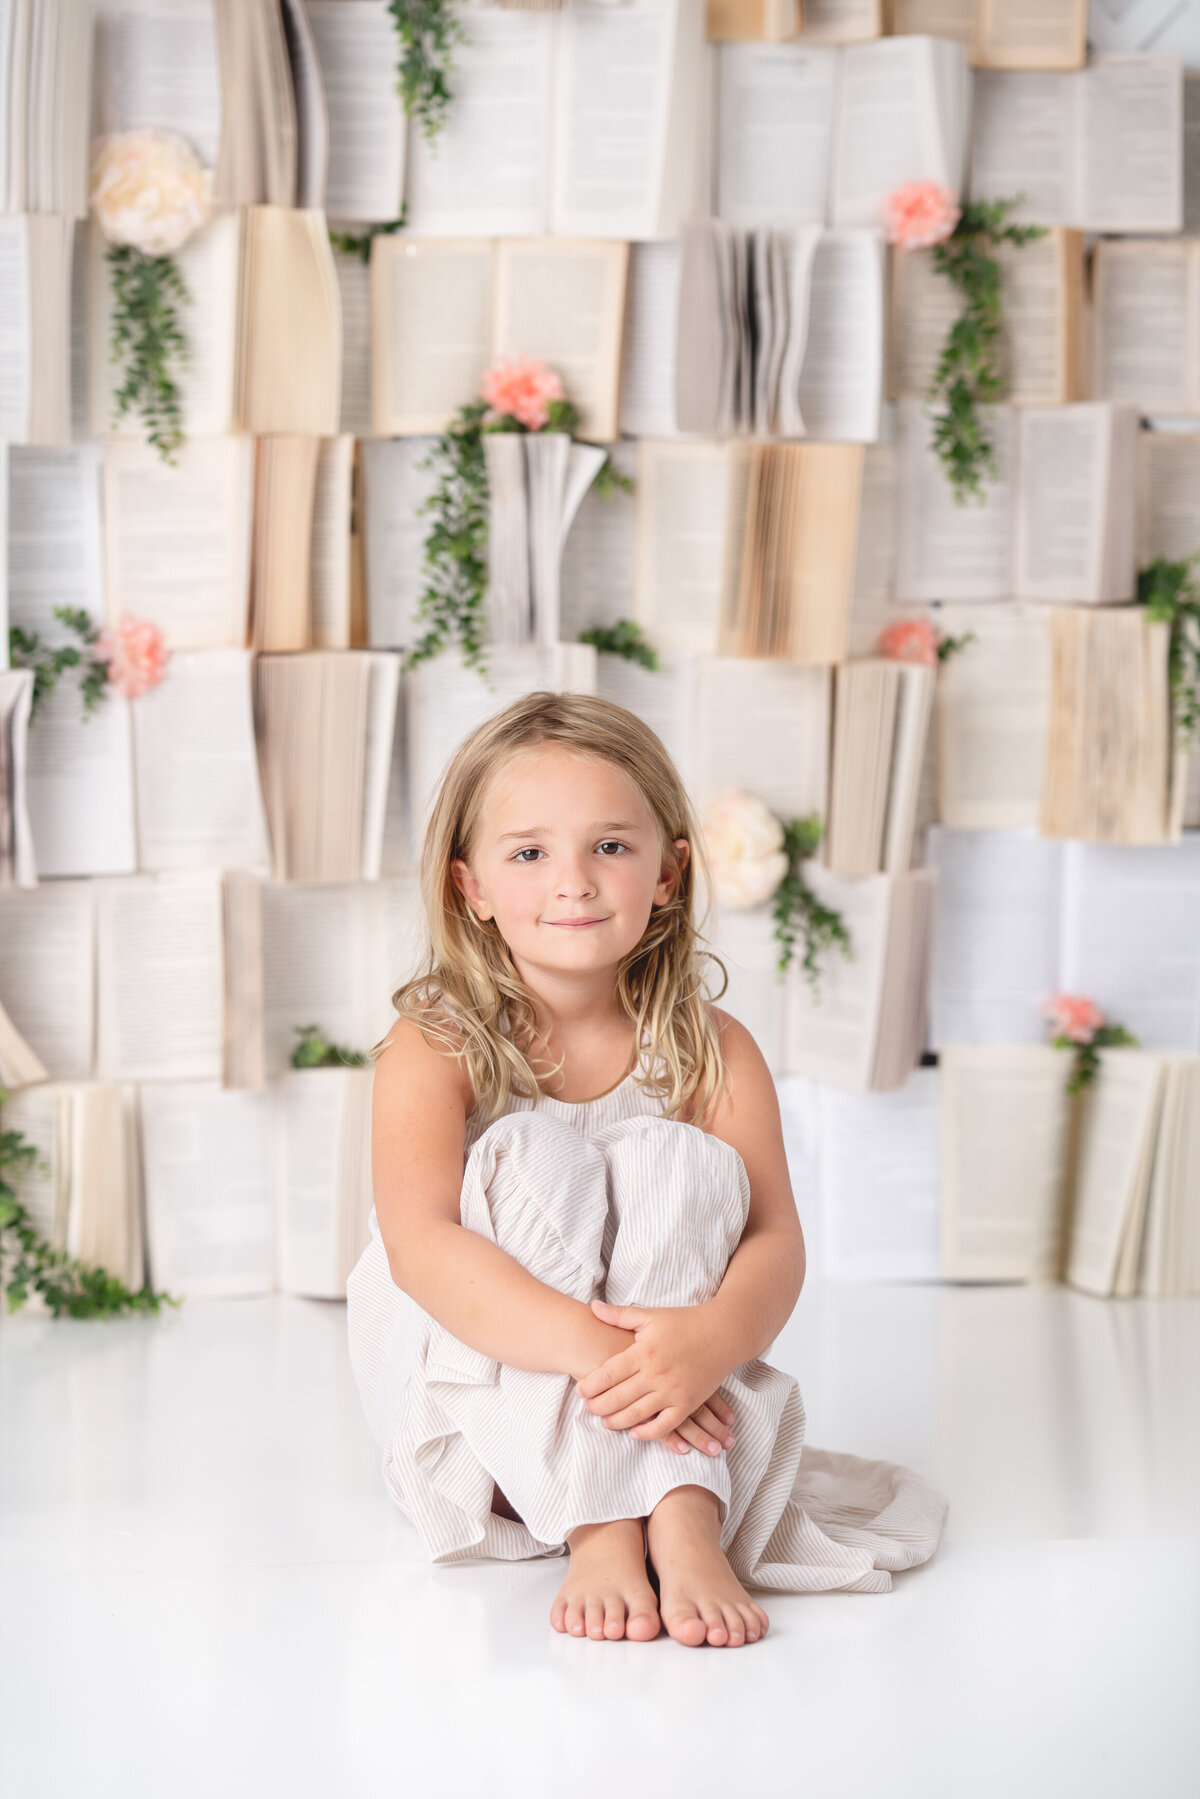 A young girl is sitting in front of a backdrop made of books.